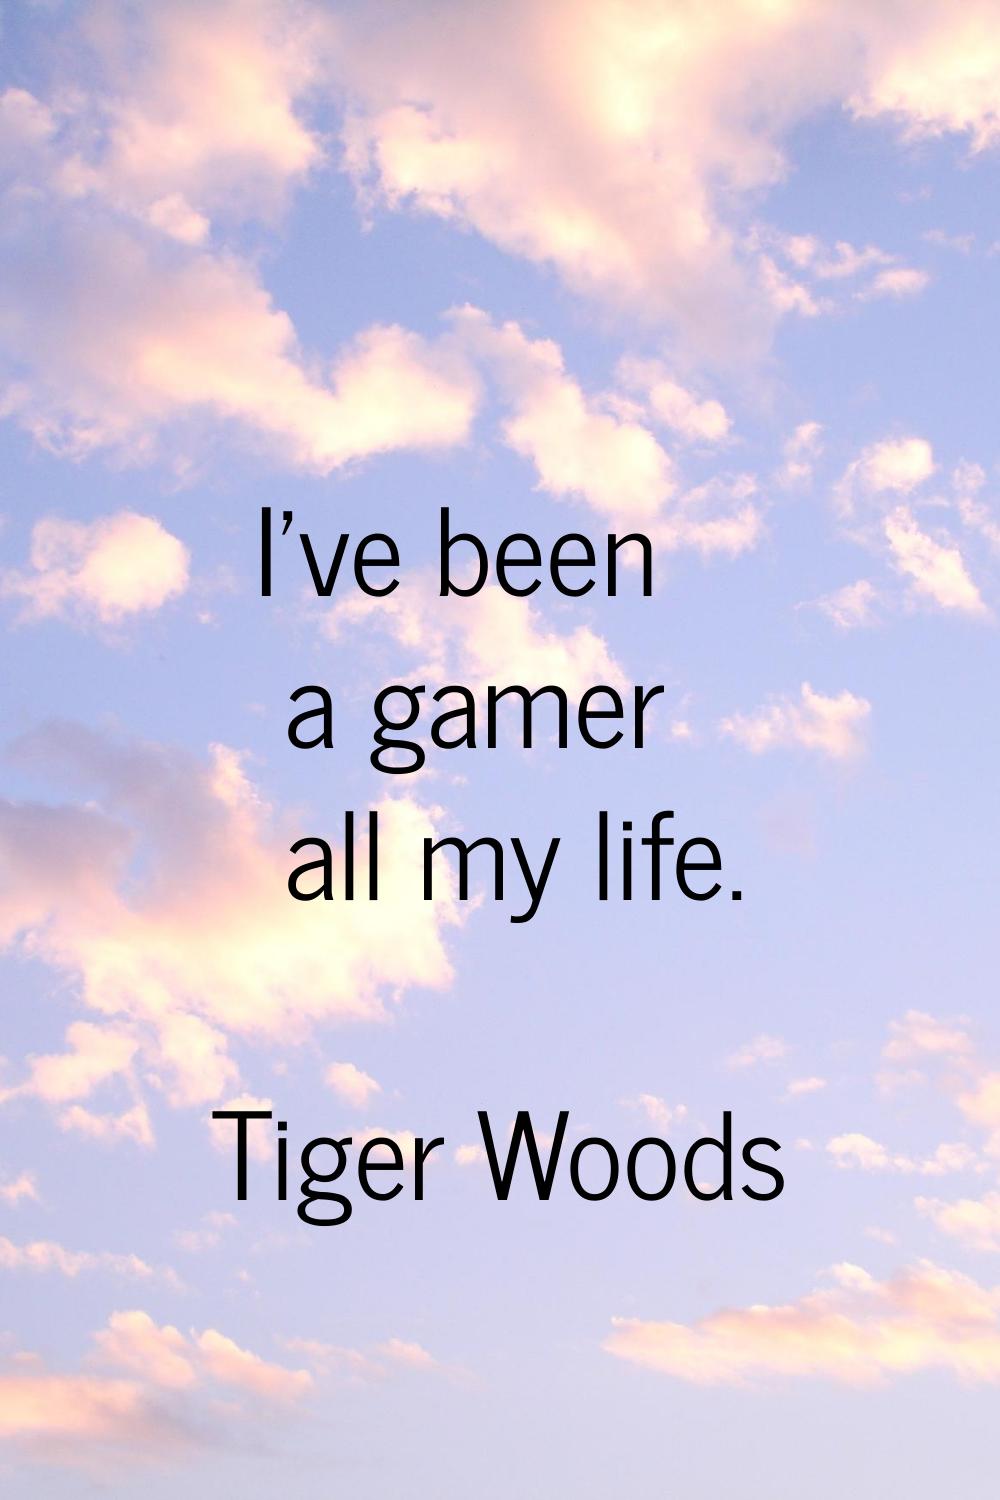 I've been a gamer all my life.